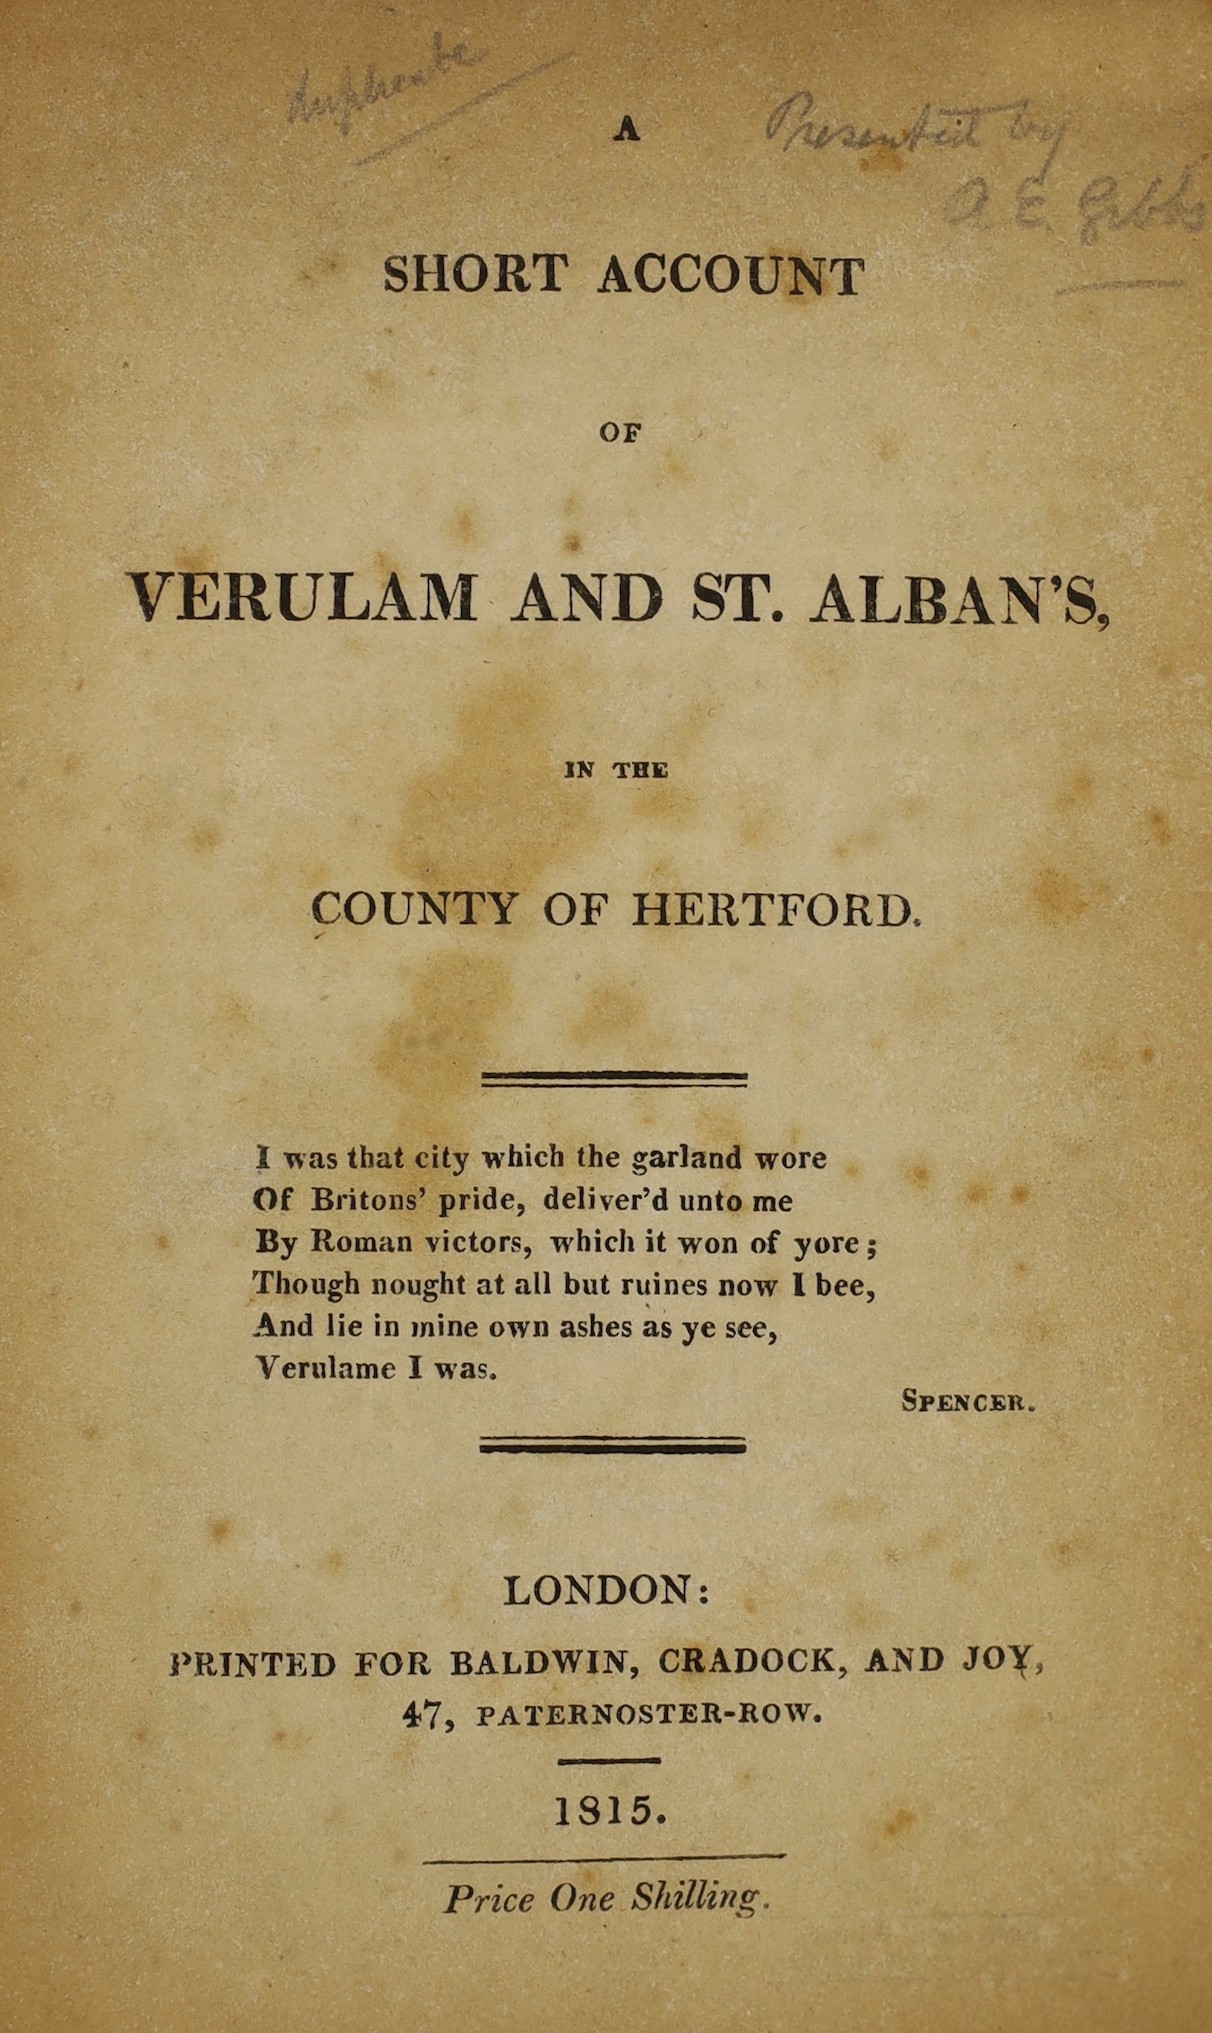 HERTS: A Short Account of Verulam and St. Albans ... old limp leather cloth, sm.cr.8vo. 1815; Williams, Frederick Lake - An Historical and Topographical Description of the Municipium of Ancient Verulam; the Martyrdom of